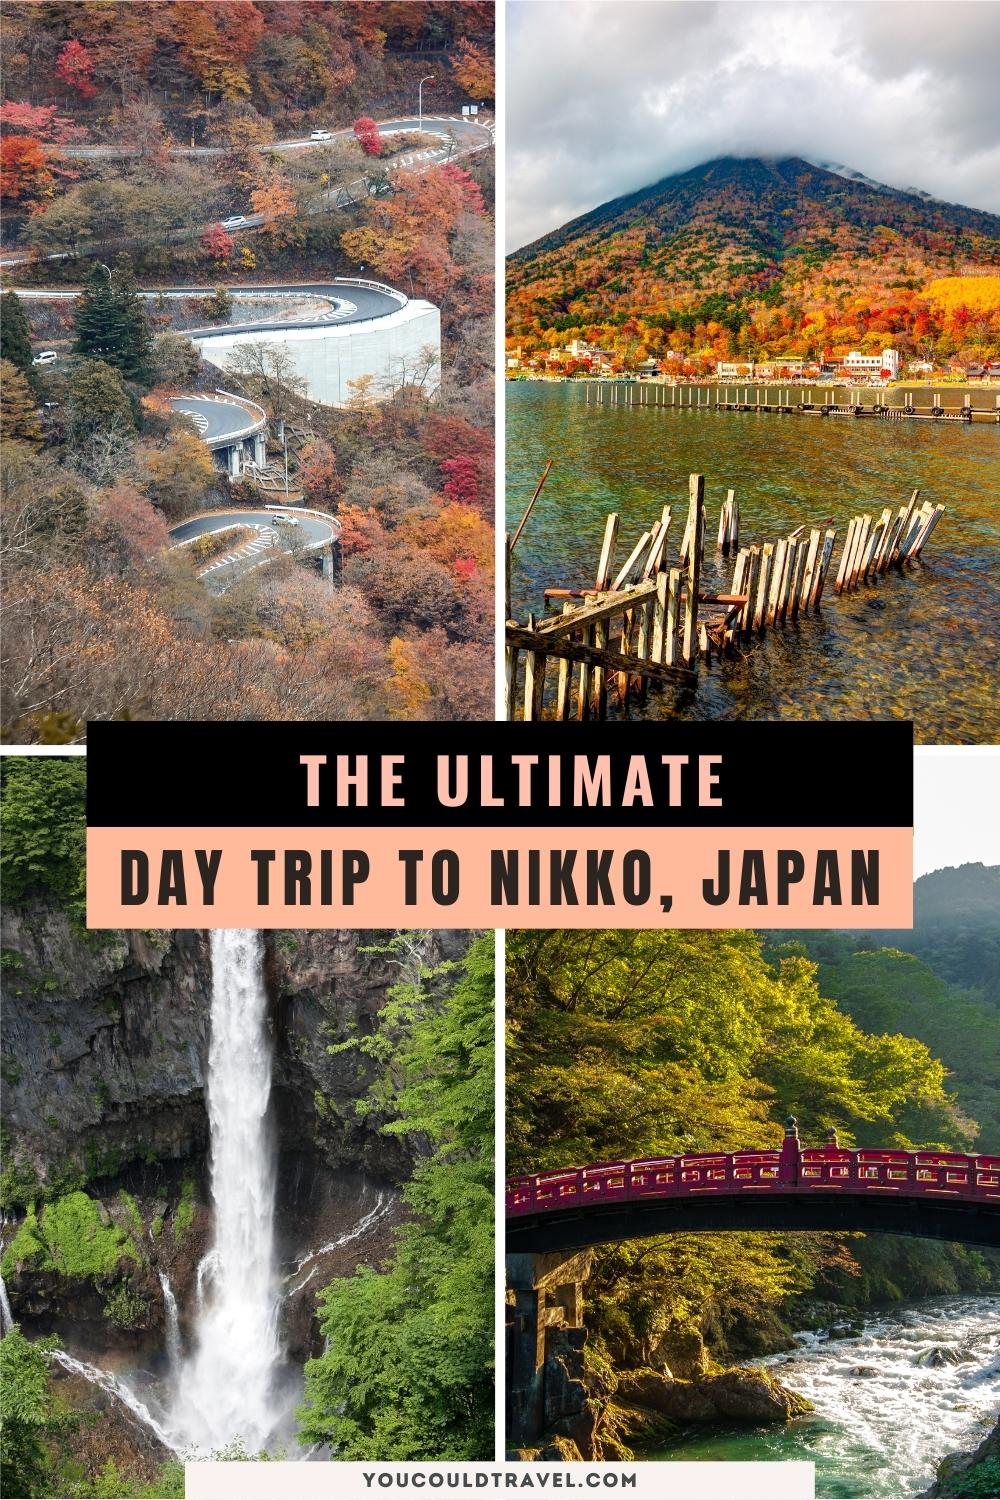 An efficient day trip to Nikko itinerary